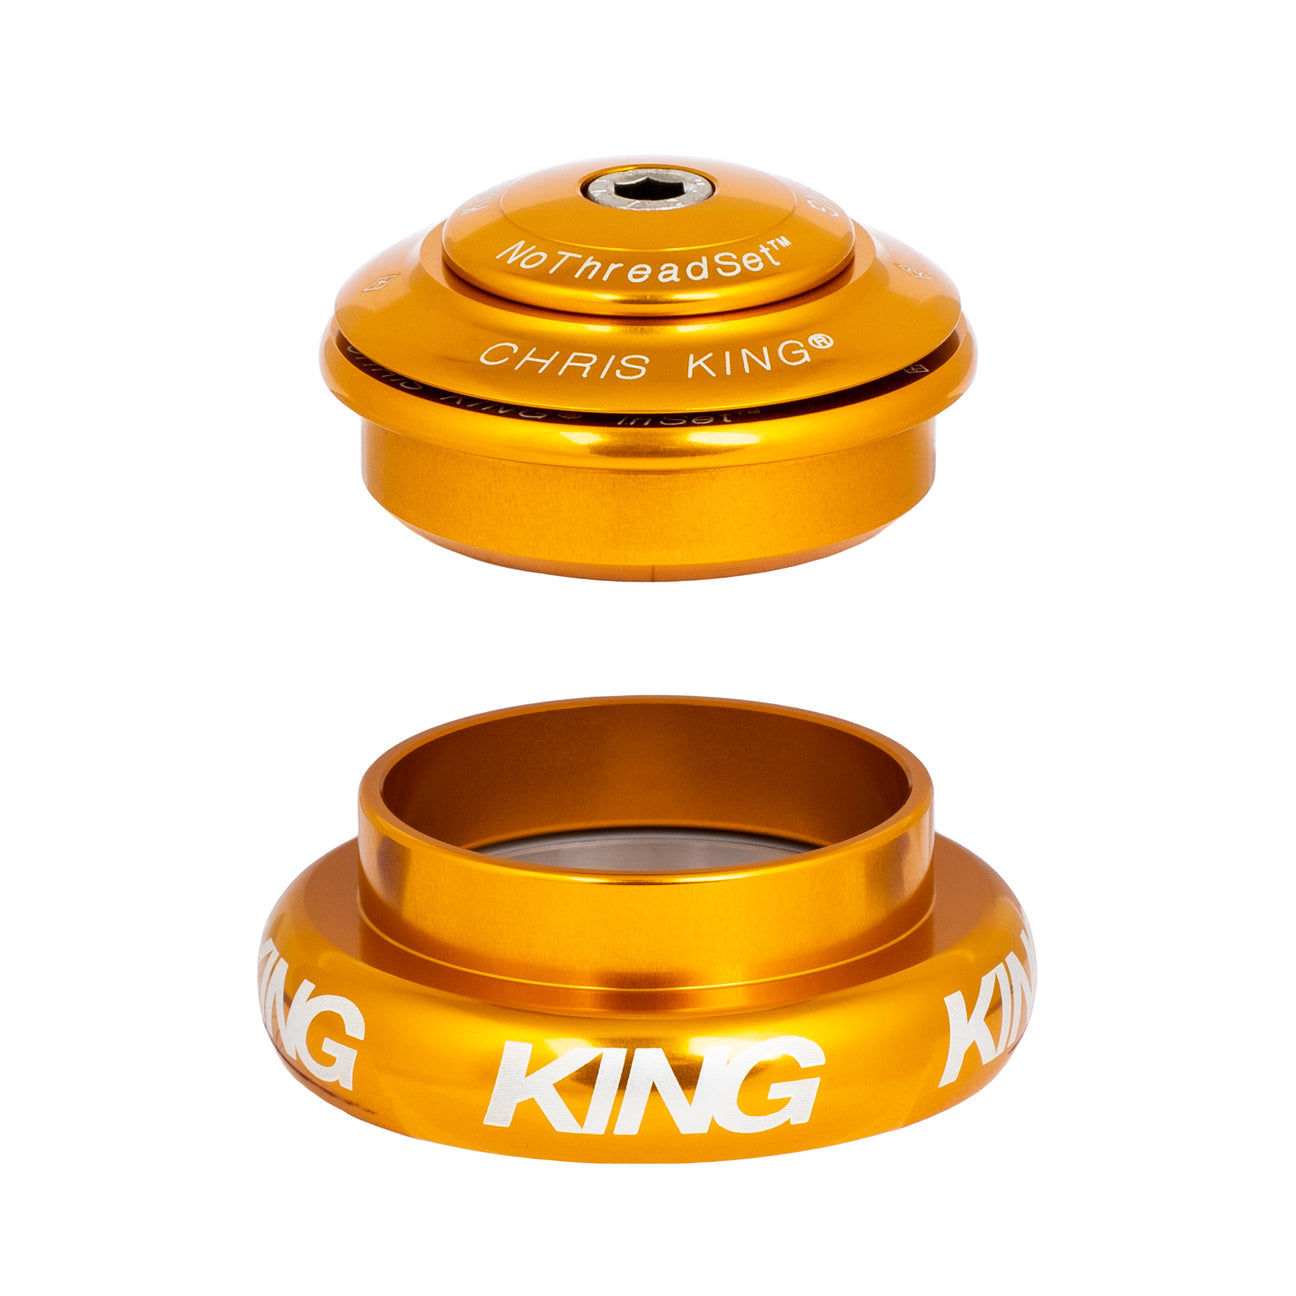 Chris King inset 7 headset in gold